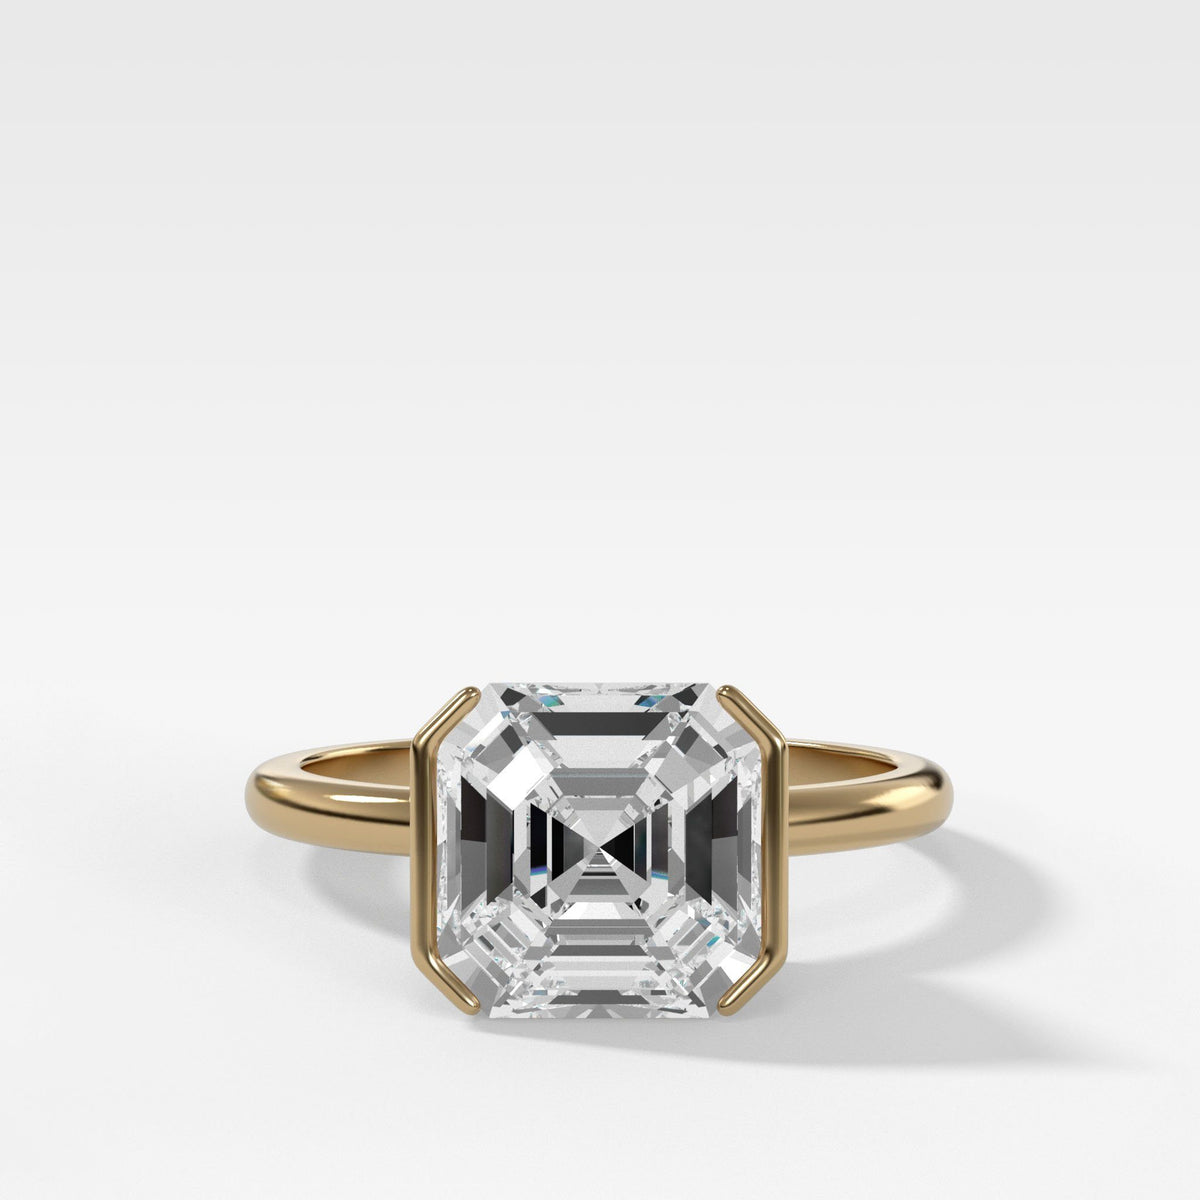 Half Bezel Solitaire Engagement Ring With Asscher Cut by Good Stone in Yellow Gold